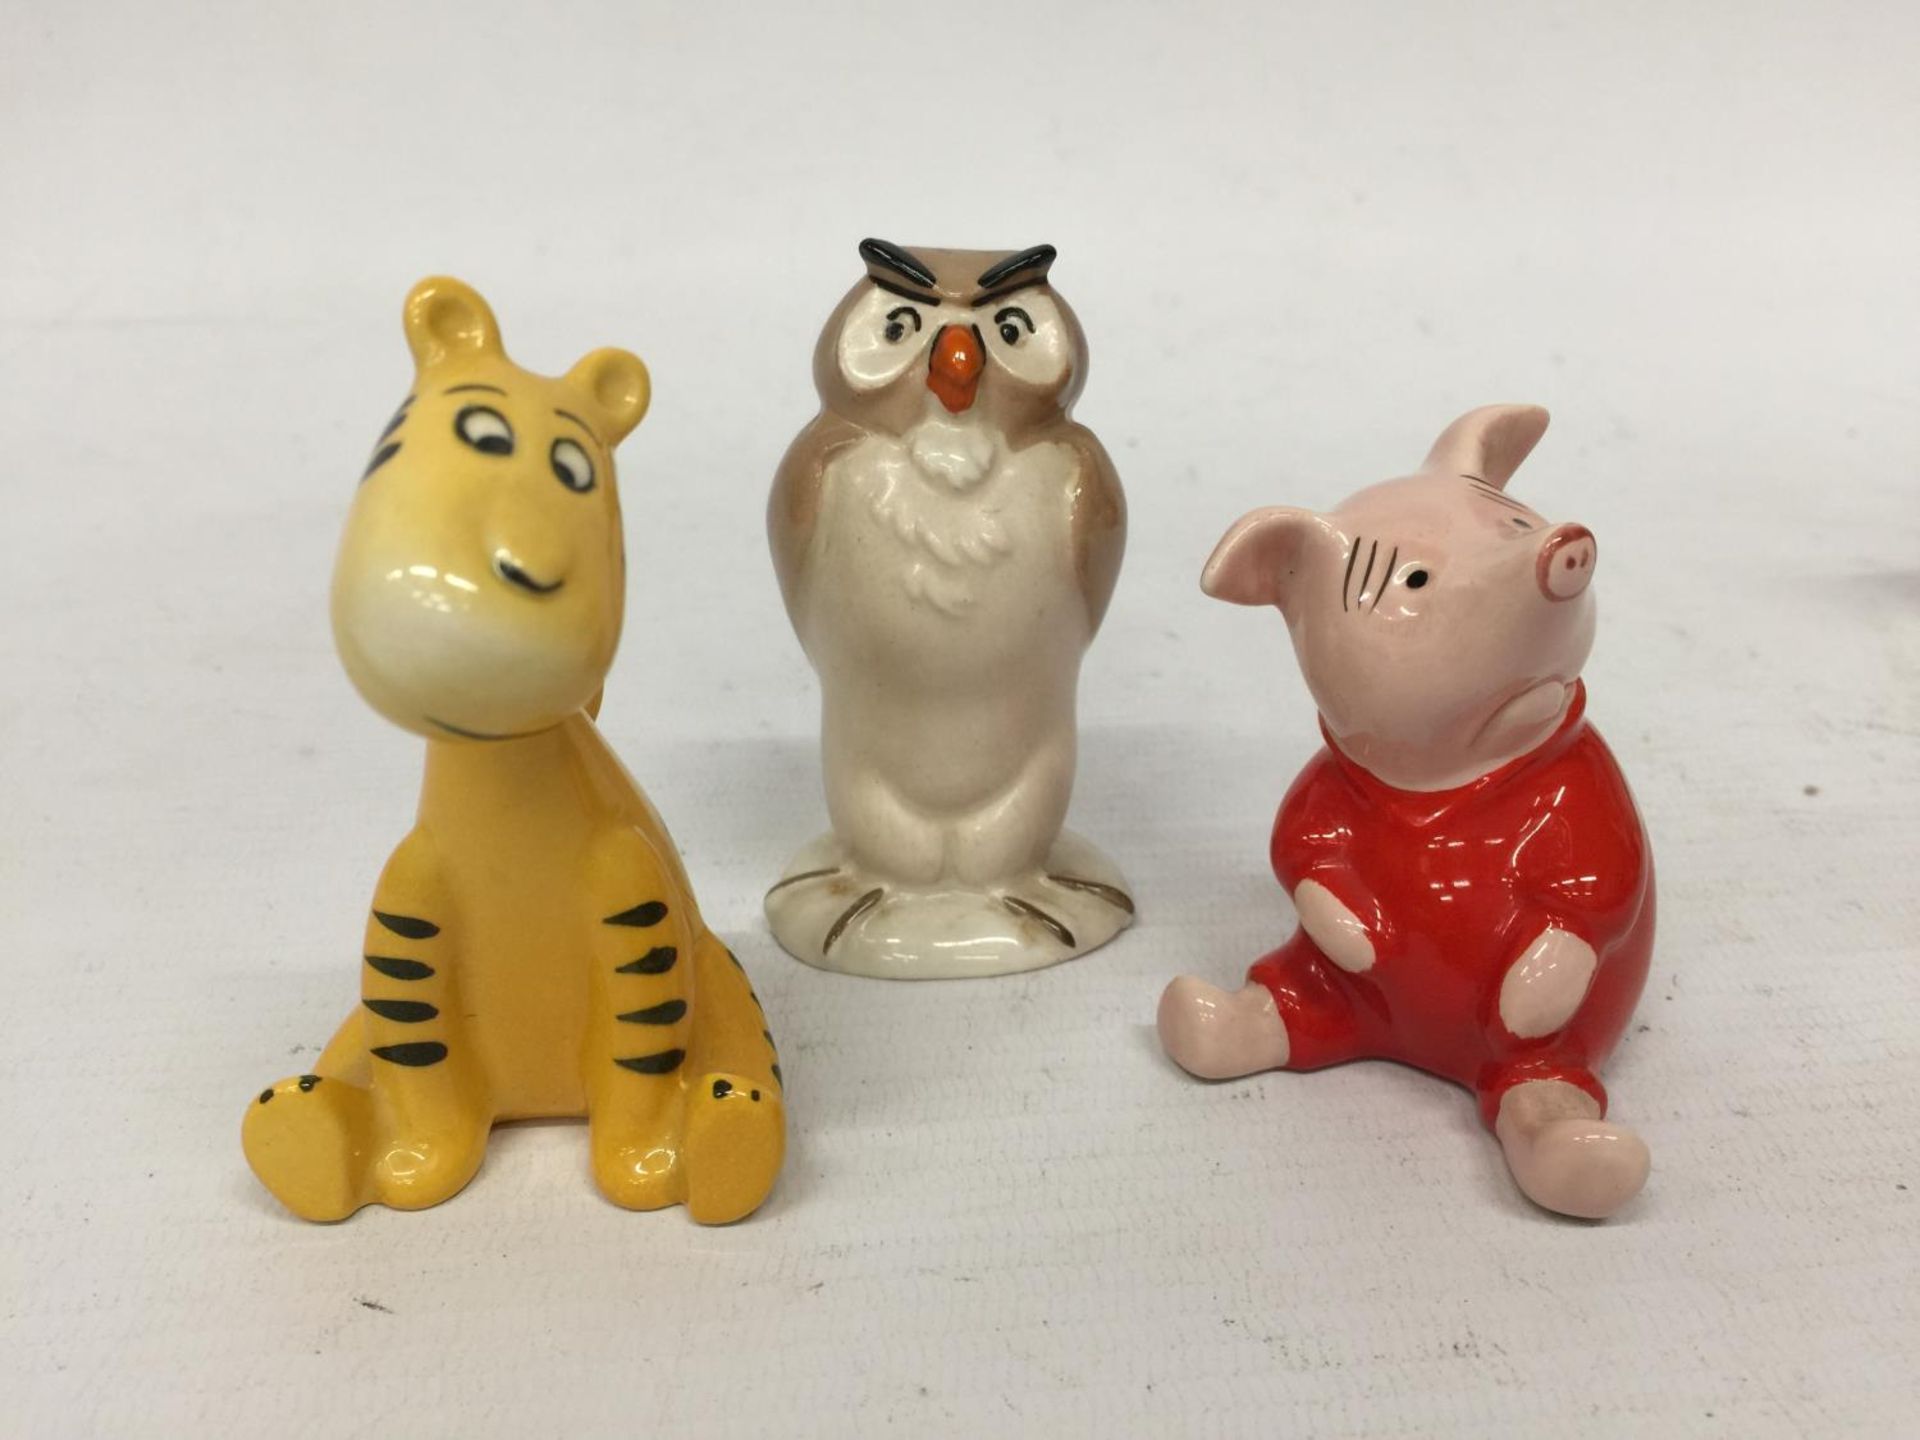 EIGHT DISNEY WINNE THE POOH FIGURES BY BESWICK - TWO WITH GOLD BACKSTAMPS - Image 5 of 6